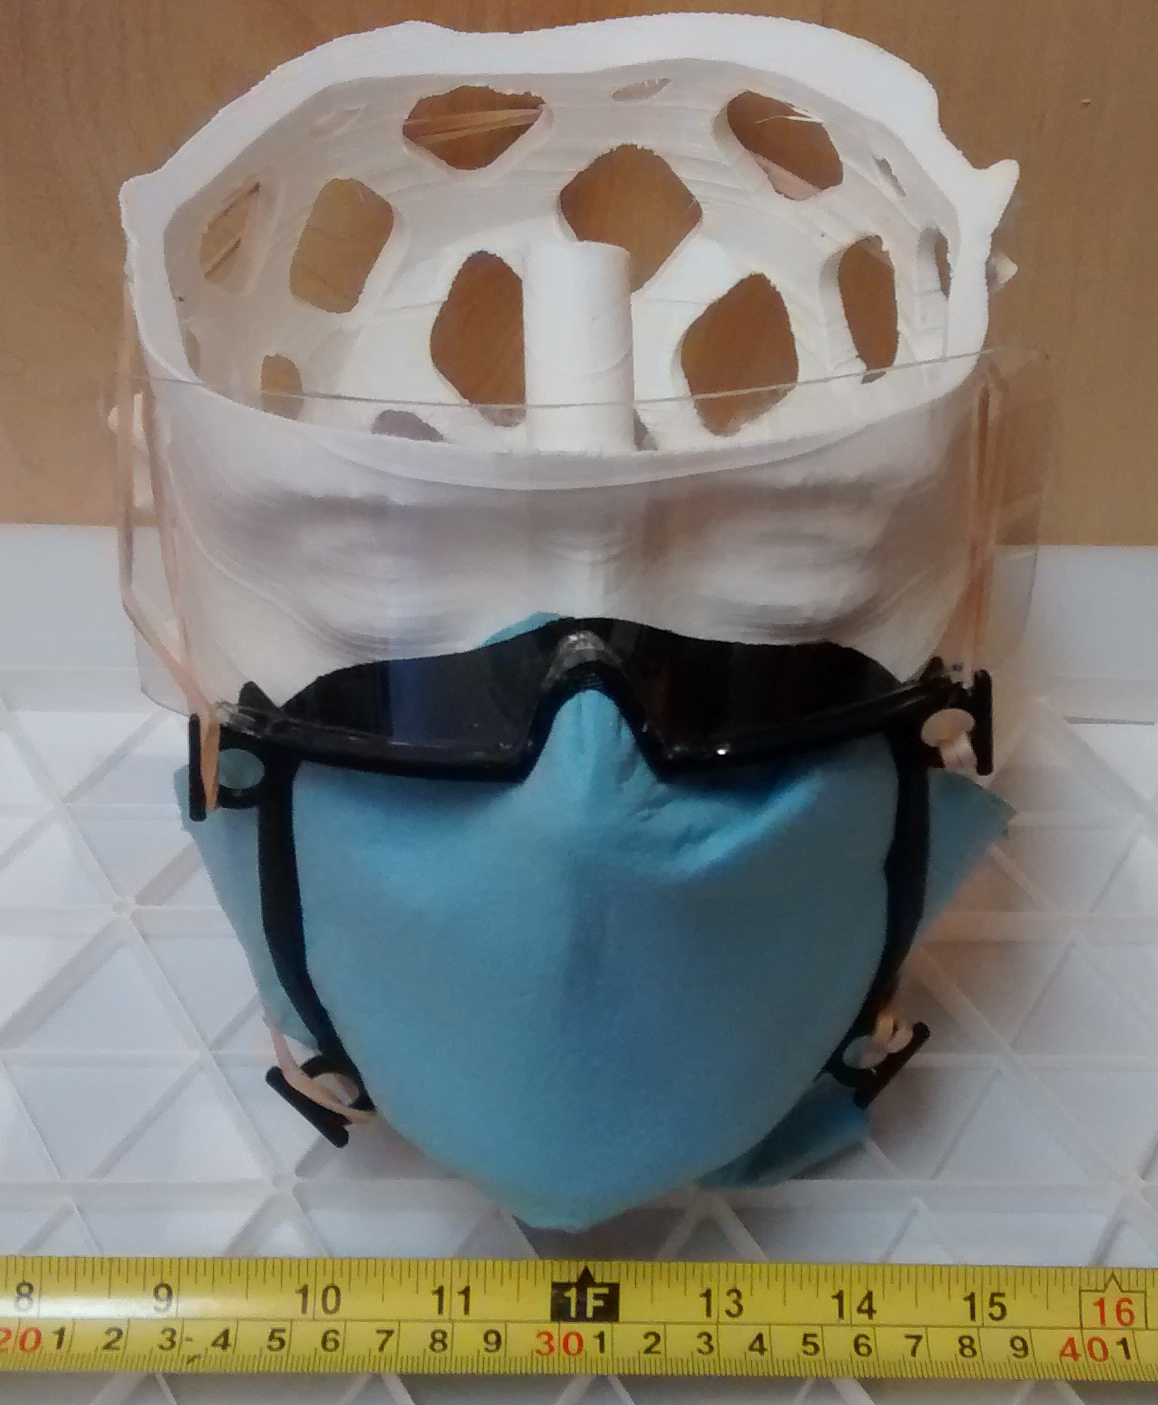 Sample mask wrapped around a skull-shaped frame, topped by an eye-protection shield. A tape measure shows the width is 6-7 inches wide.